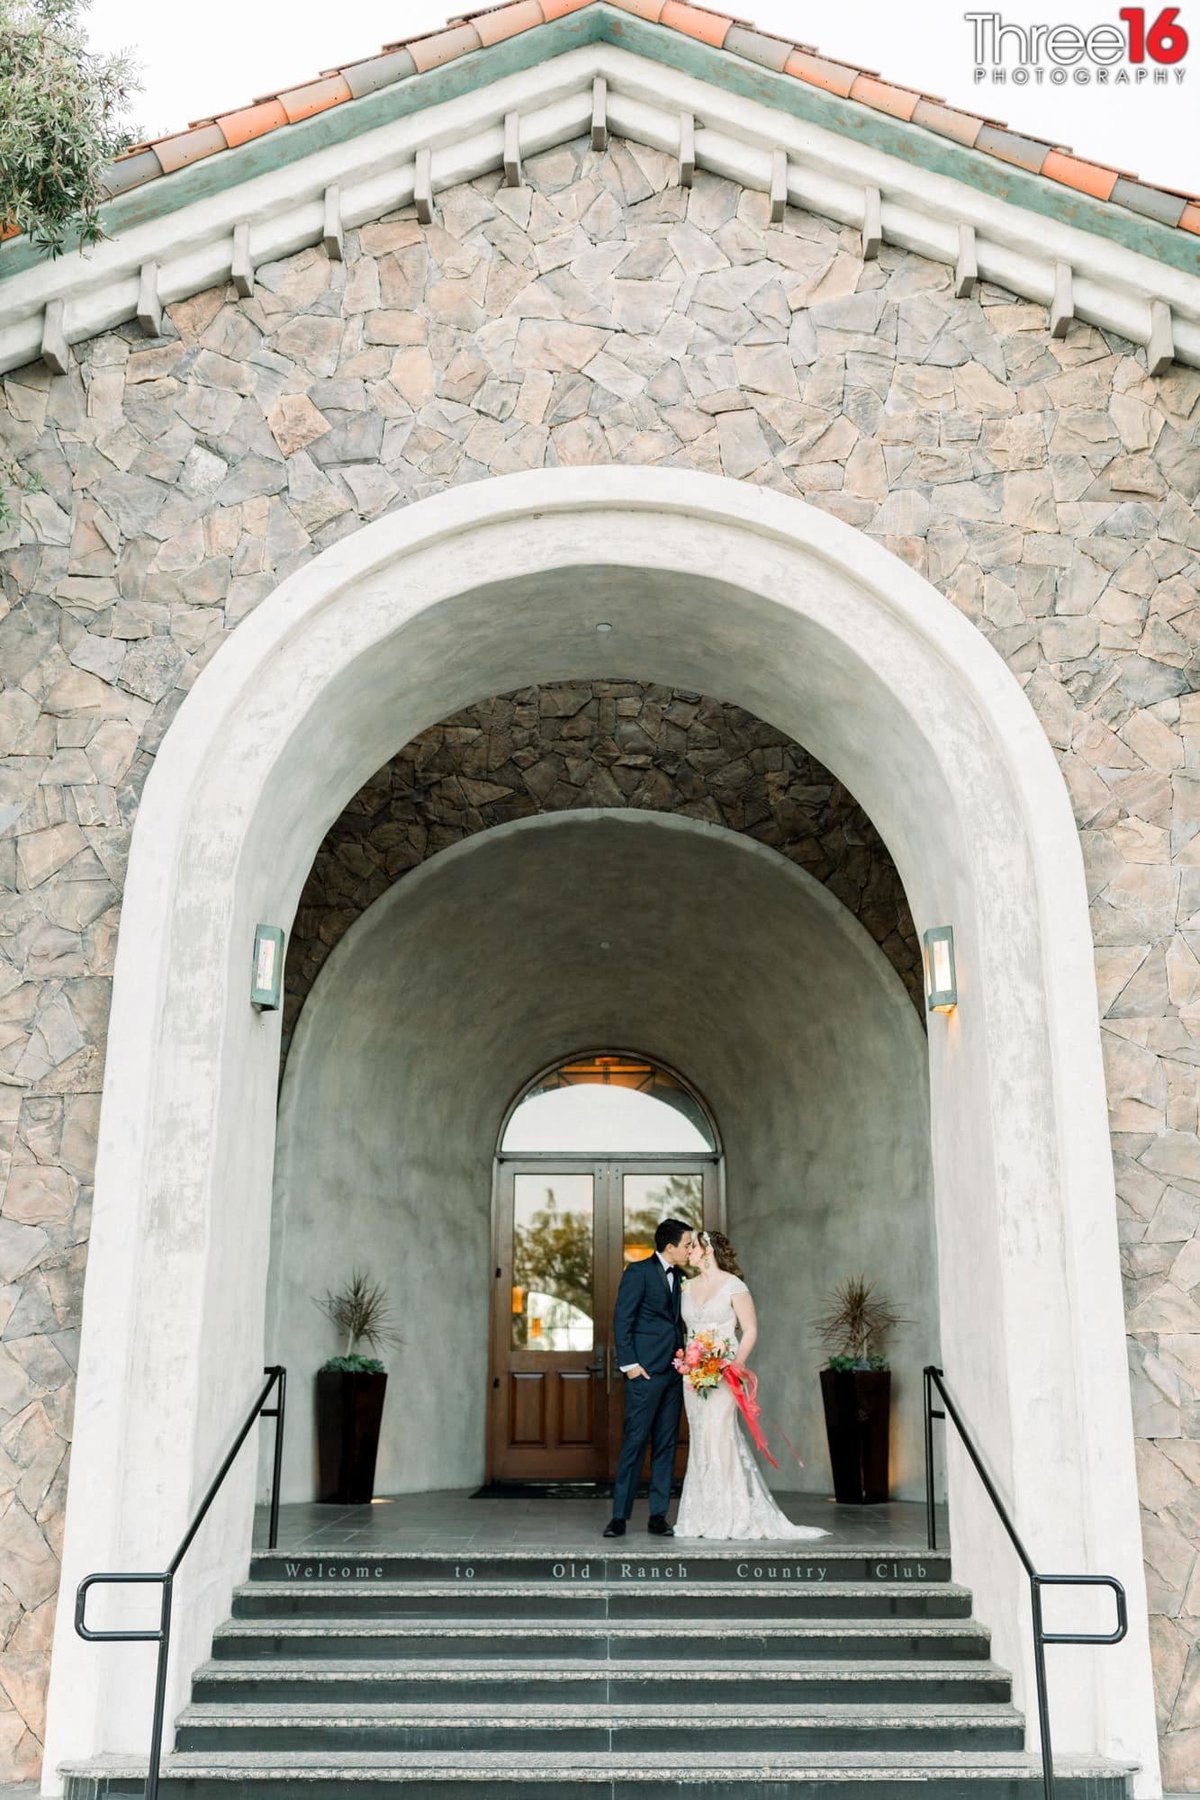 Bride and Groom share a kiss under the large archway entrance